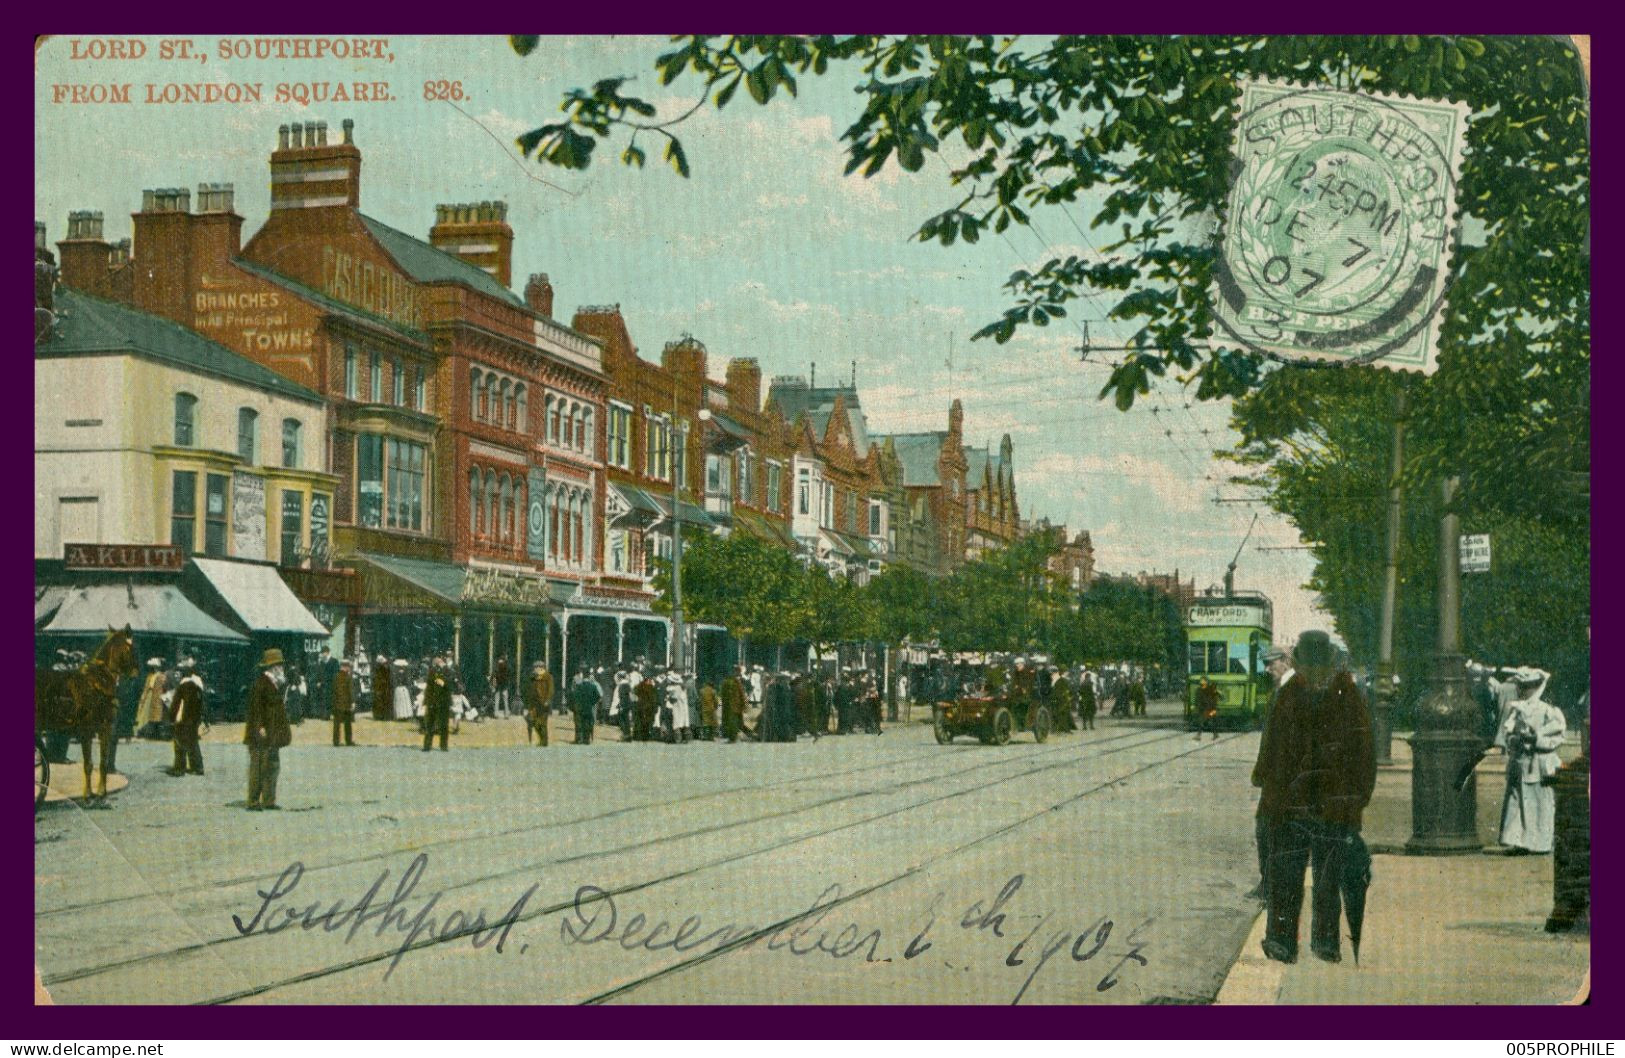 * Southport * Lord Street - From London Square - Tram Tramway - Animée - Série W.A. S.S. - 1907 - Colorisée - Southport